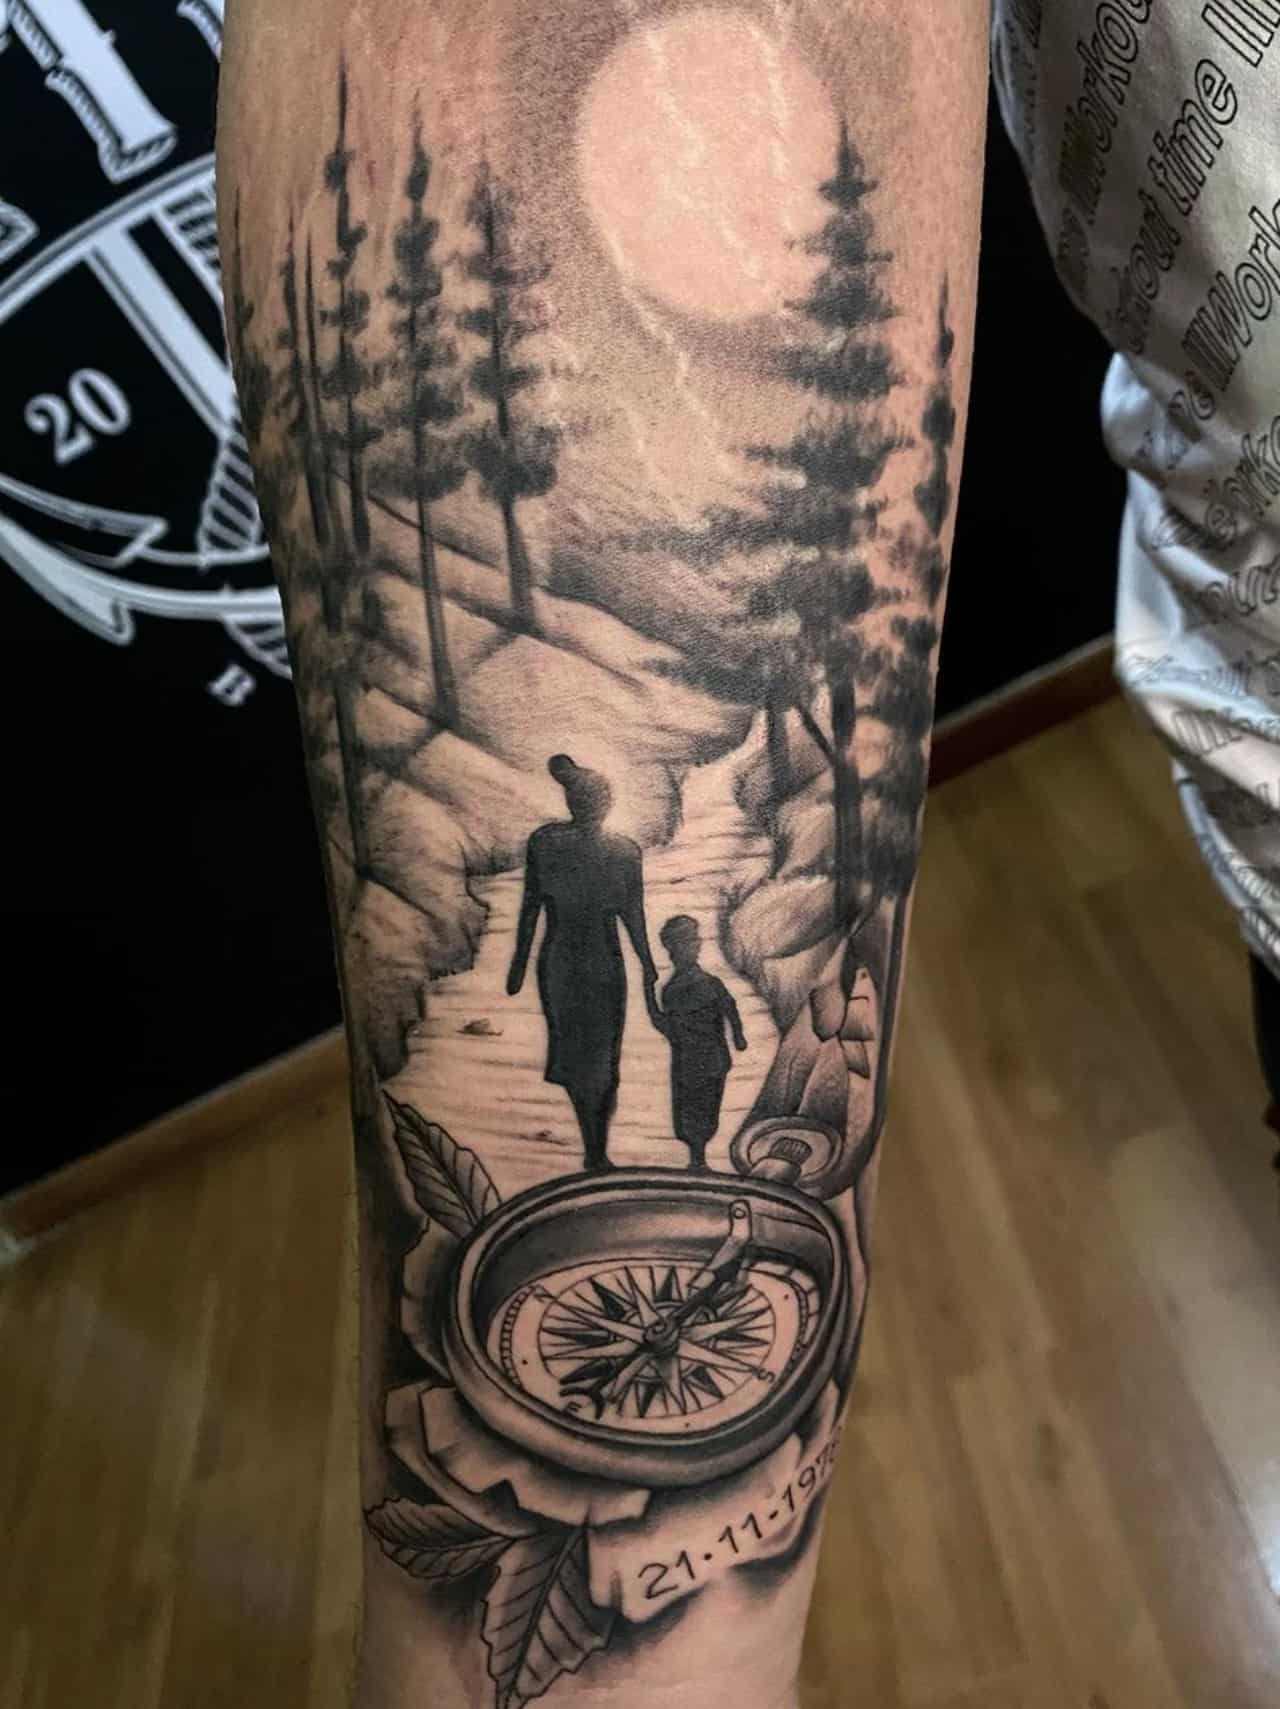 Mom and son walking into the night tattoo